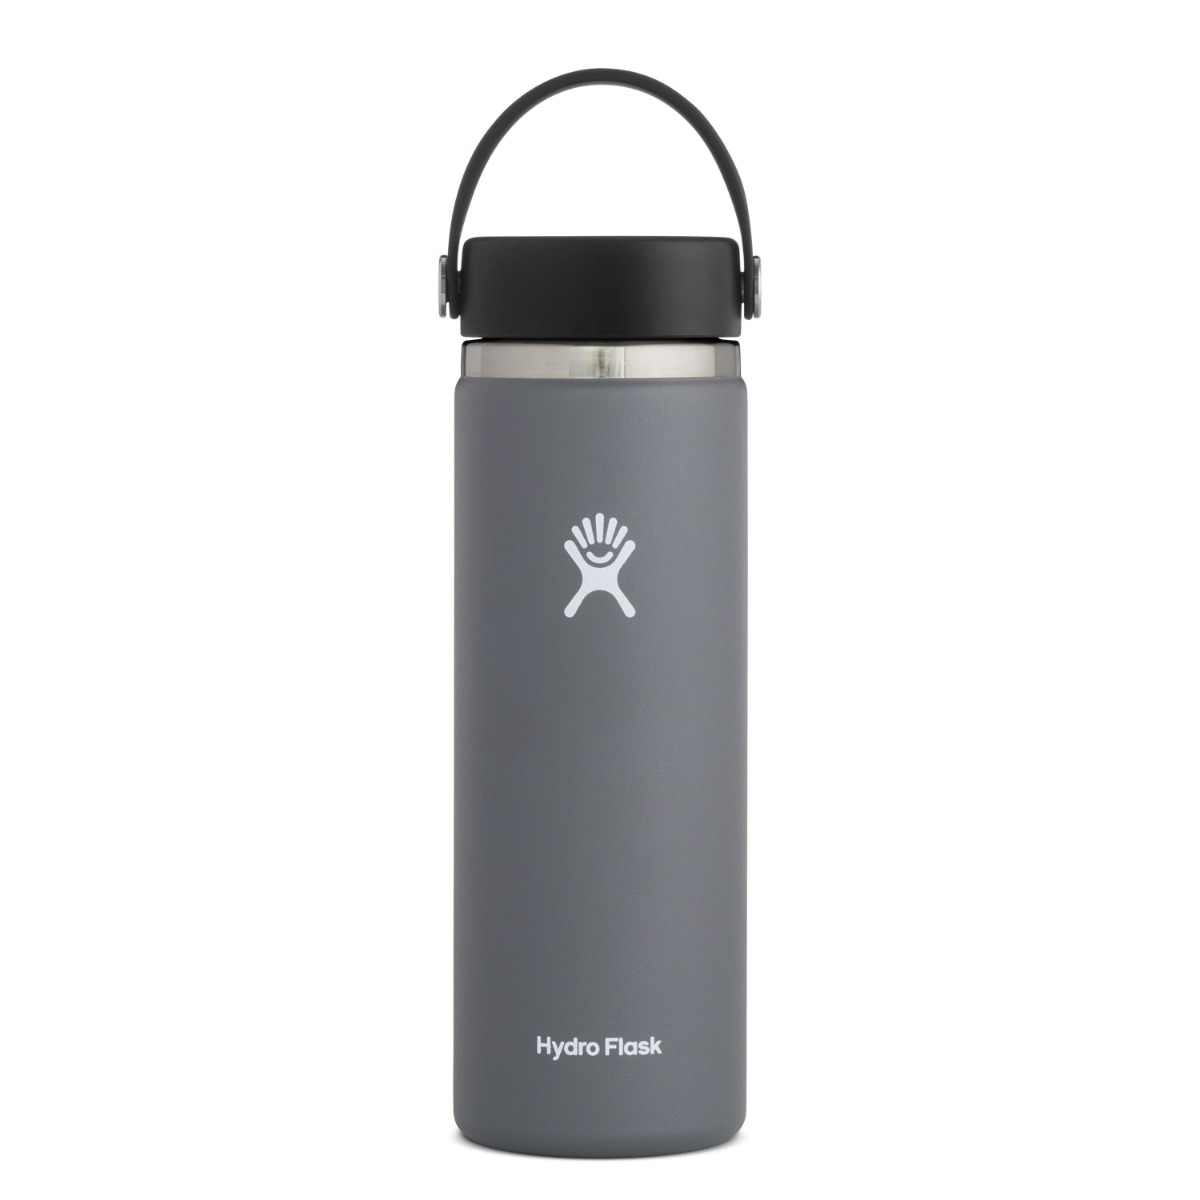 https://cdn11.bigcommerce.com/s-45mun2obzo/images/stencil/original/products/6851/31836/hydro-flask-20-oz-wide-mouth-stone__07442.1690836344.jpg?c=1